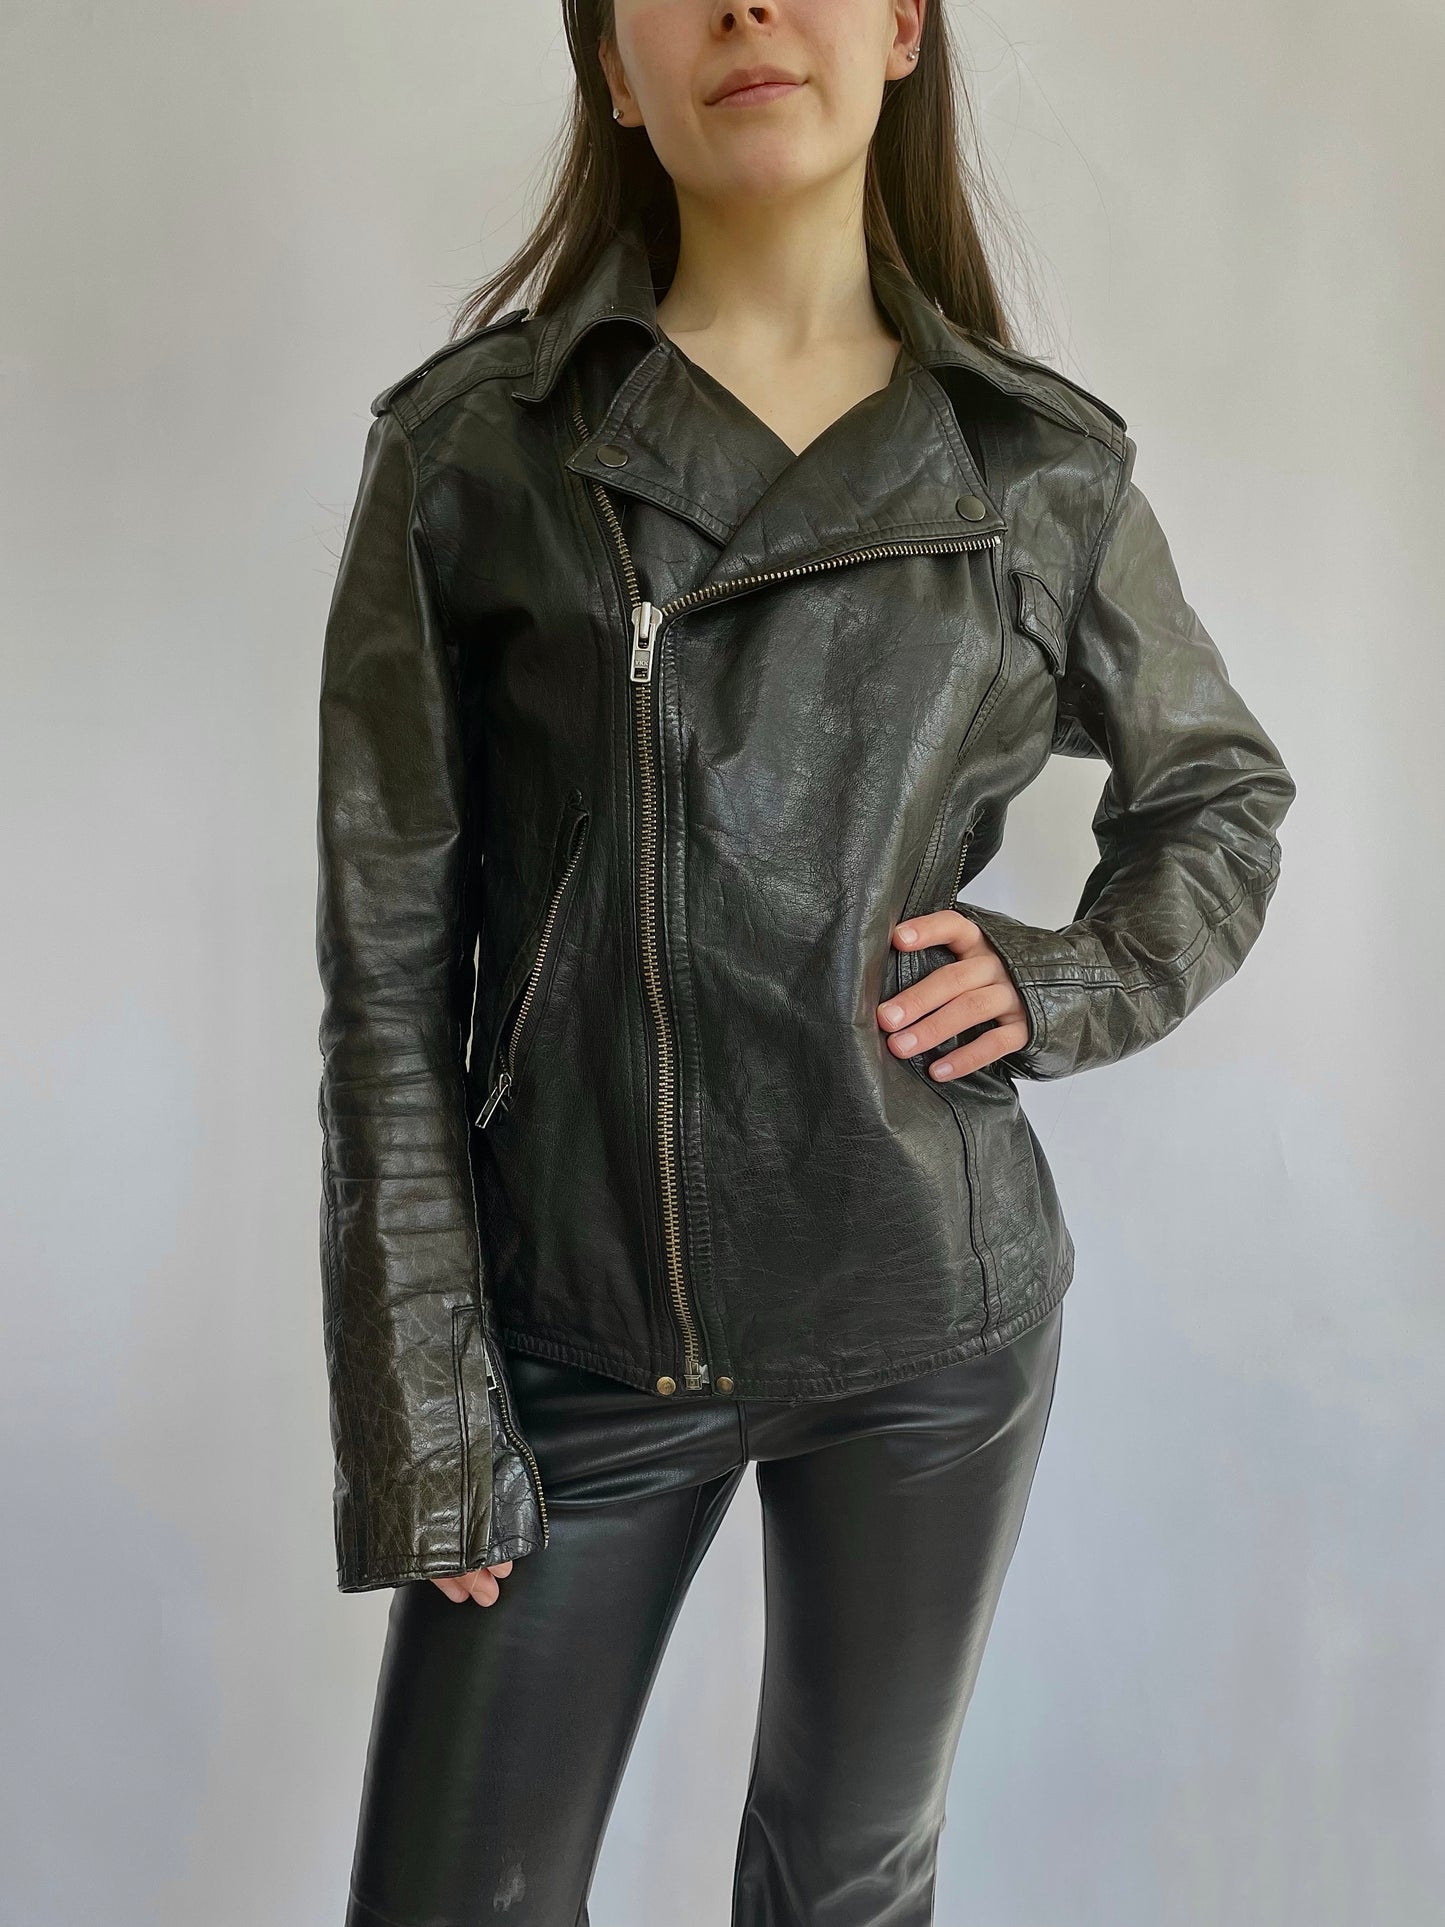 Early 2000s leather jacket